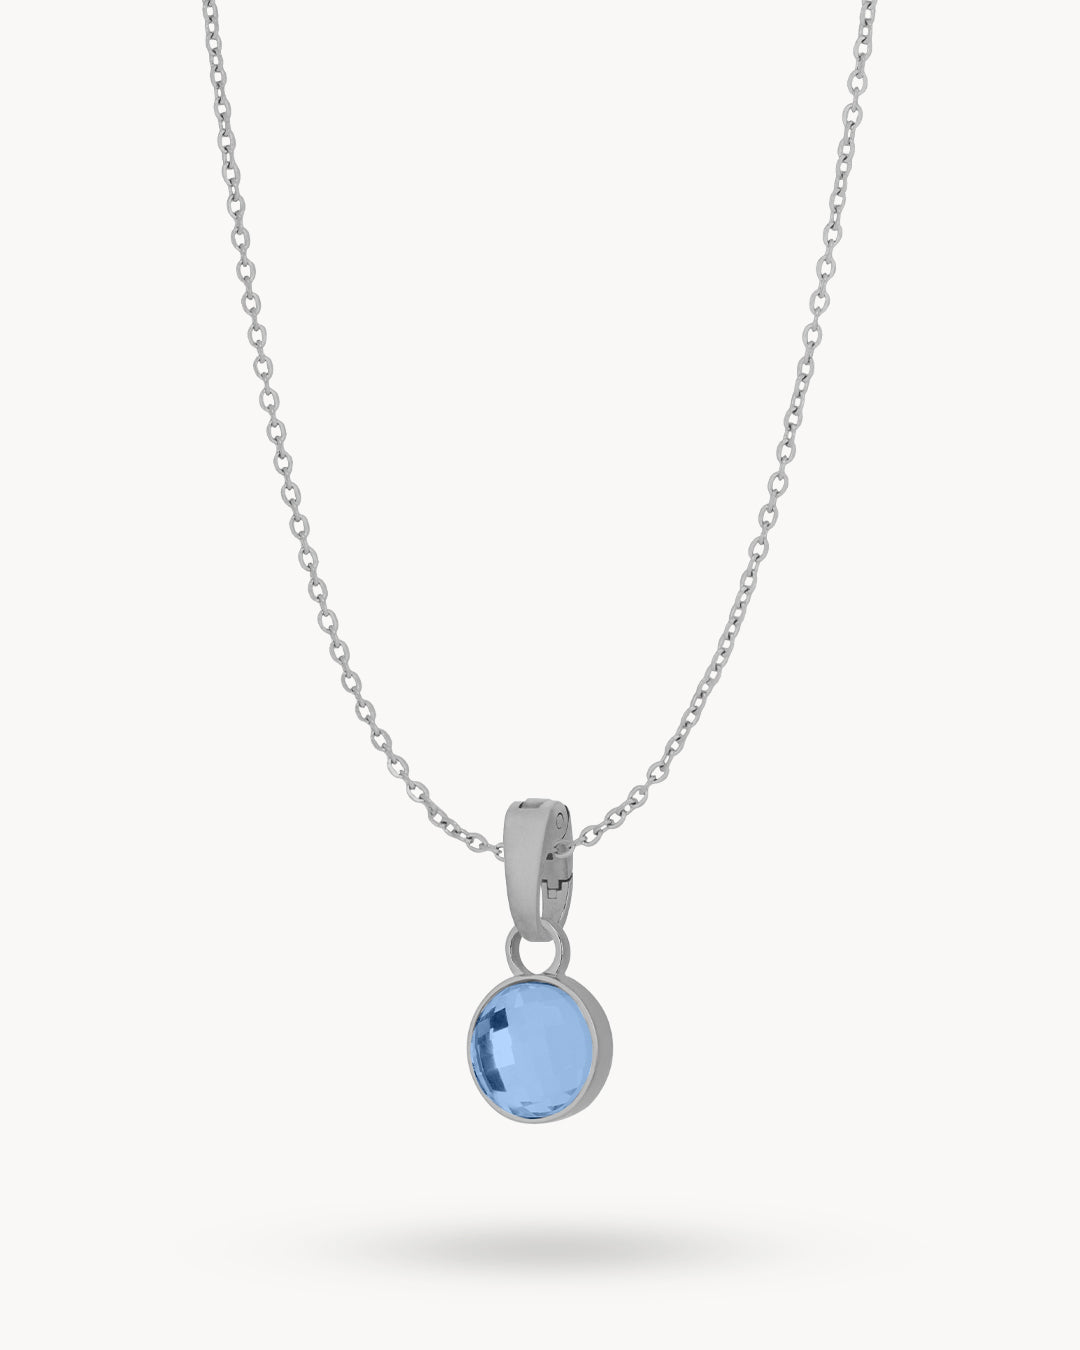 December Uniqueness Dainty Signature Birthstone Necklace Set, Silver